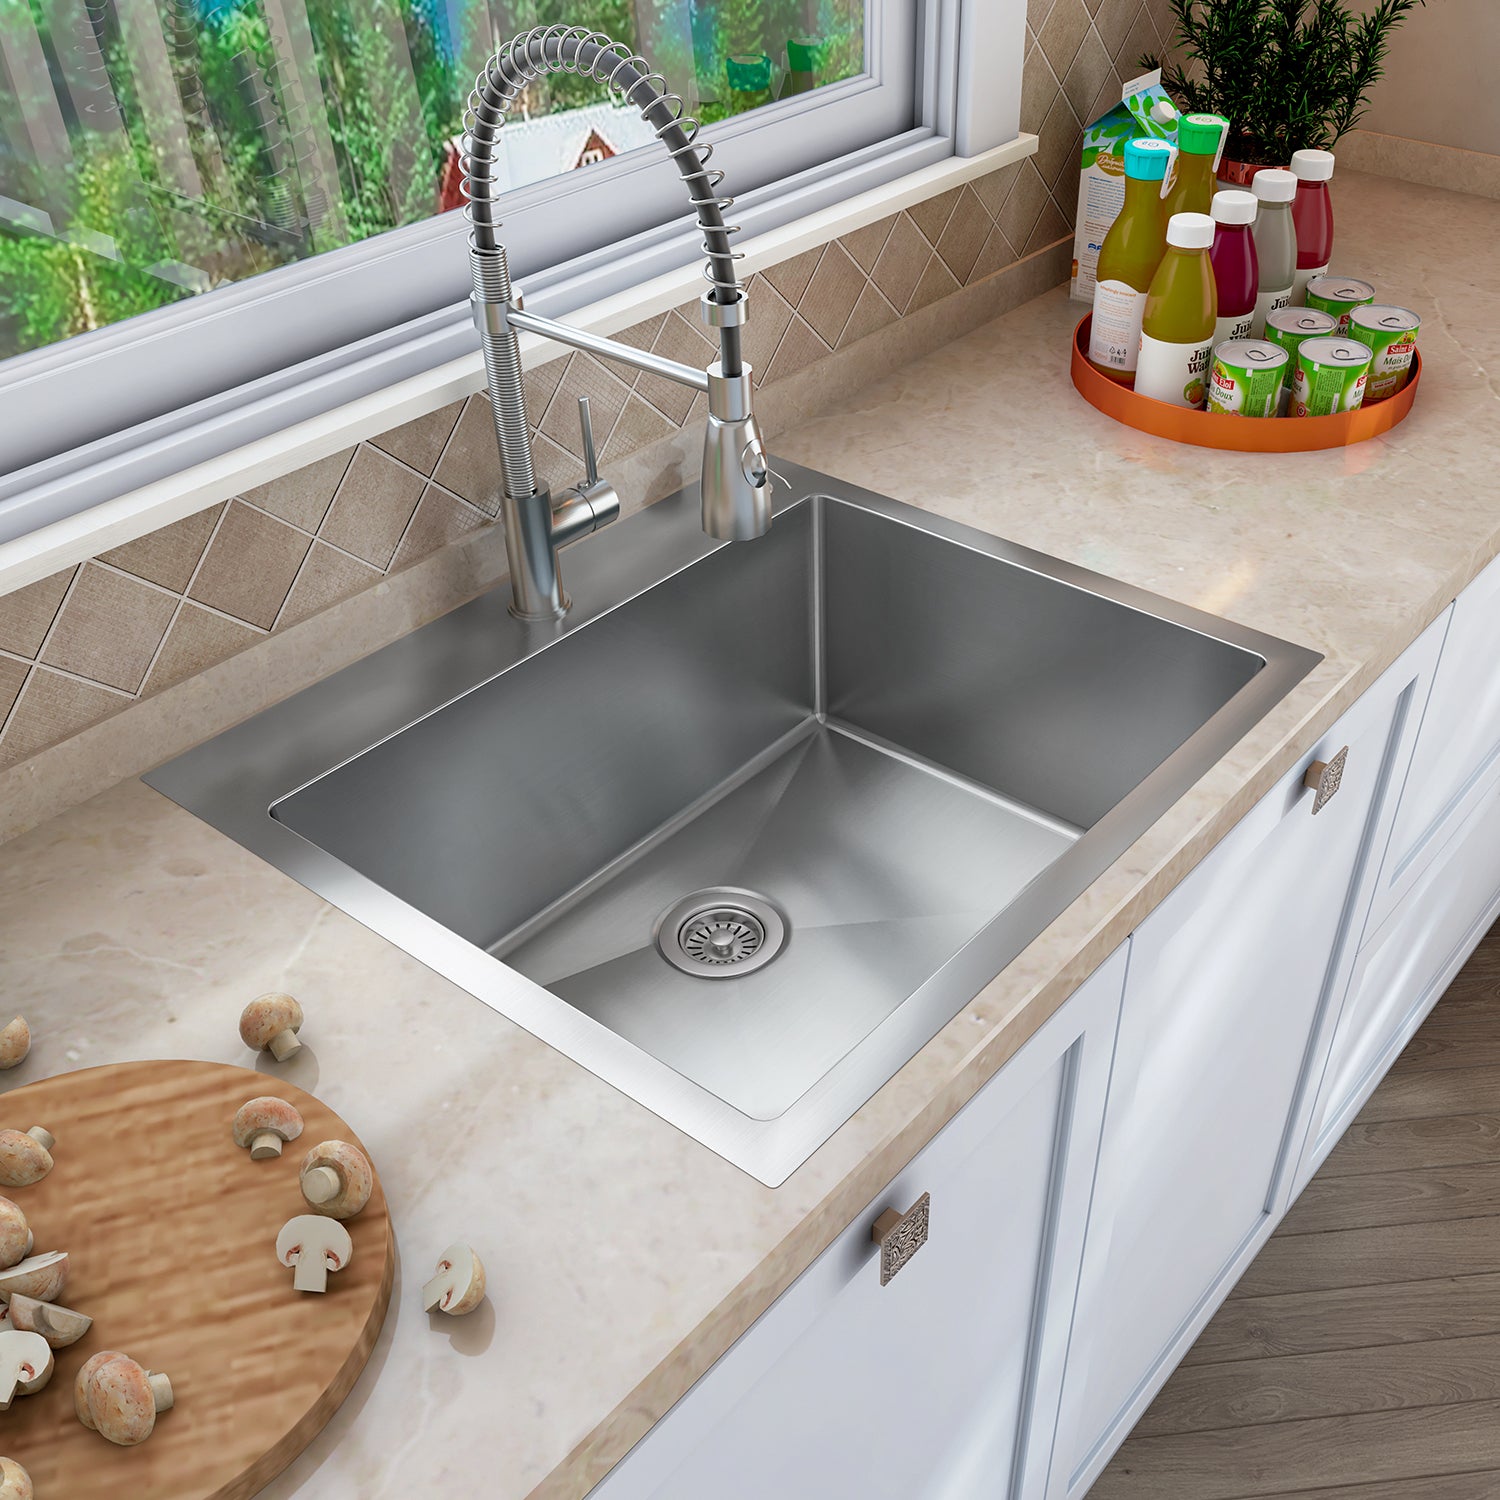 Sinber 25" x 22" x 12" Drop In Single Bowl Kitchen Sink with 18 Gauge 304 Stainless Steel Satin Finish HT2522S-S-12 (Sink Only)